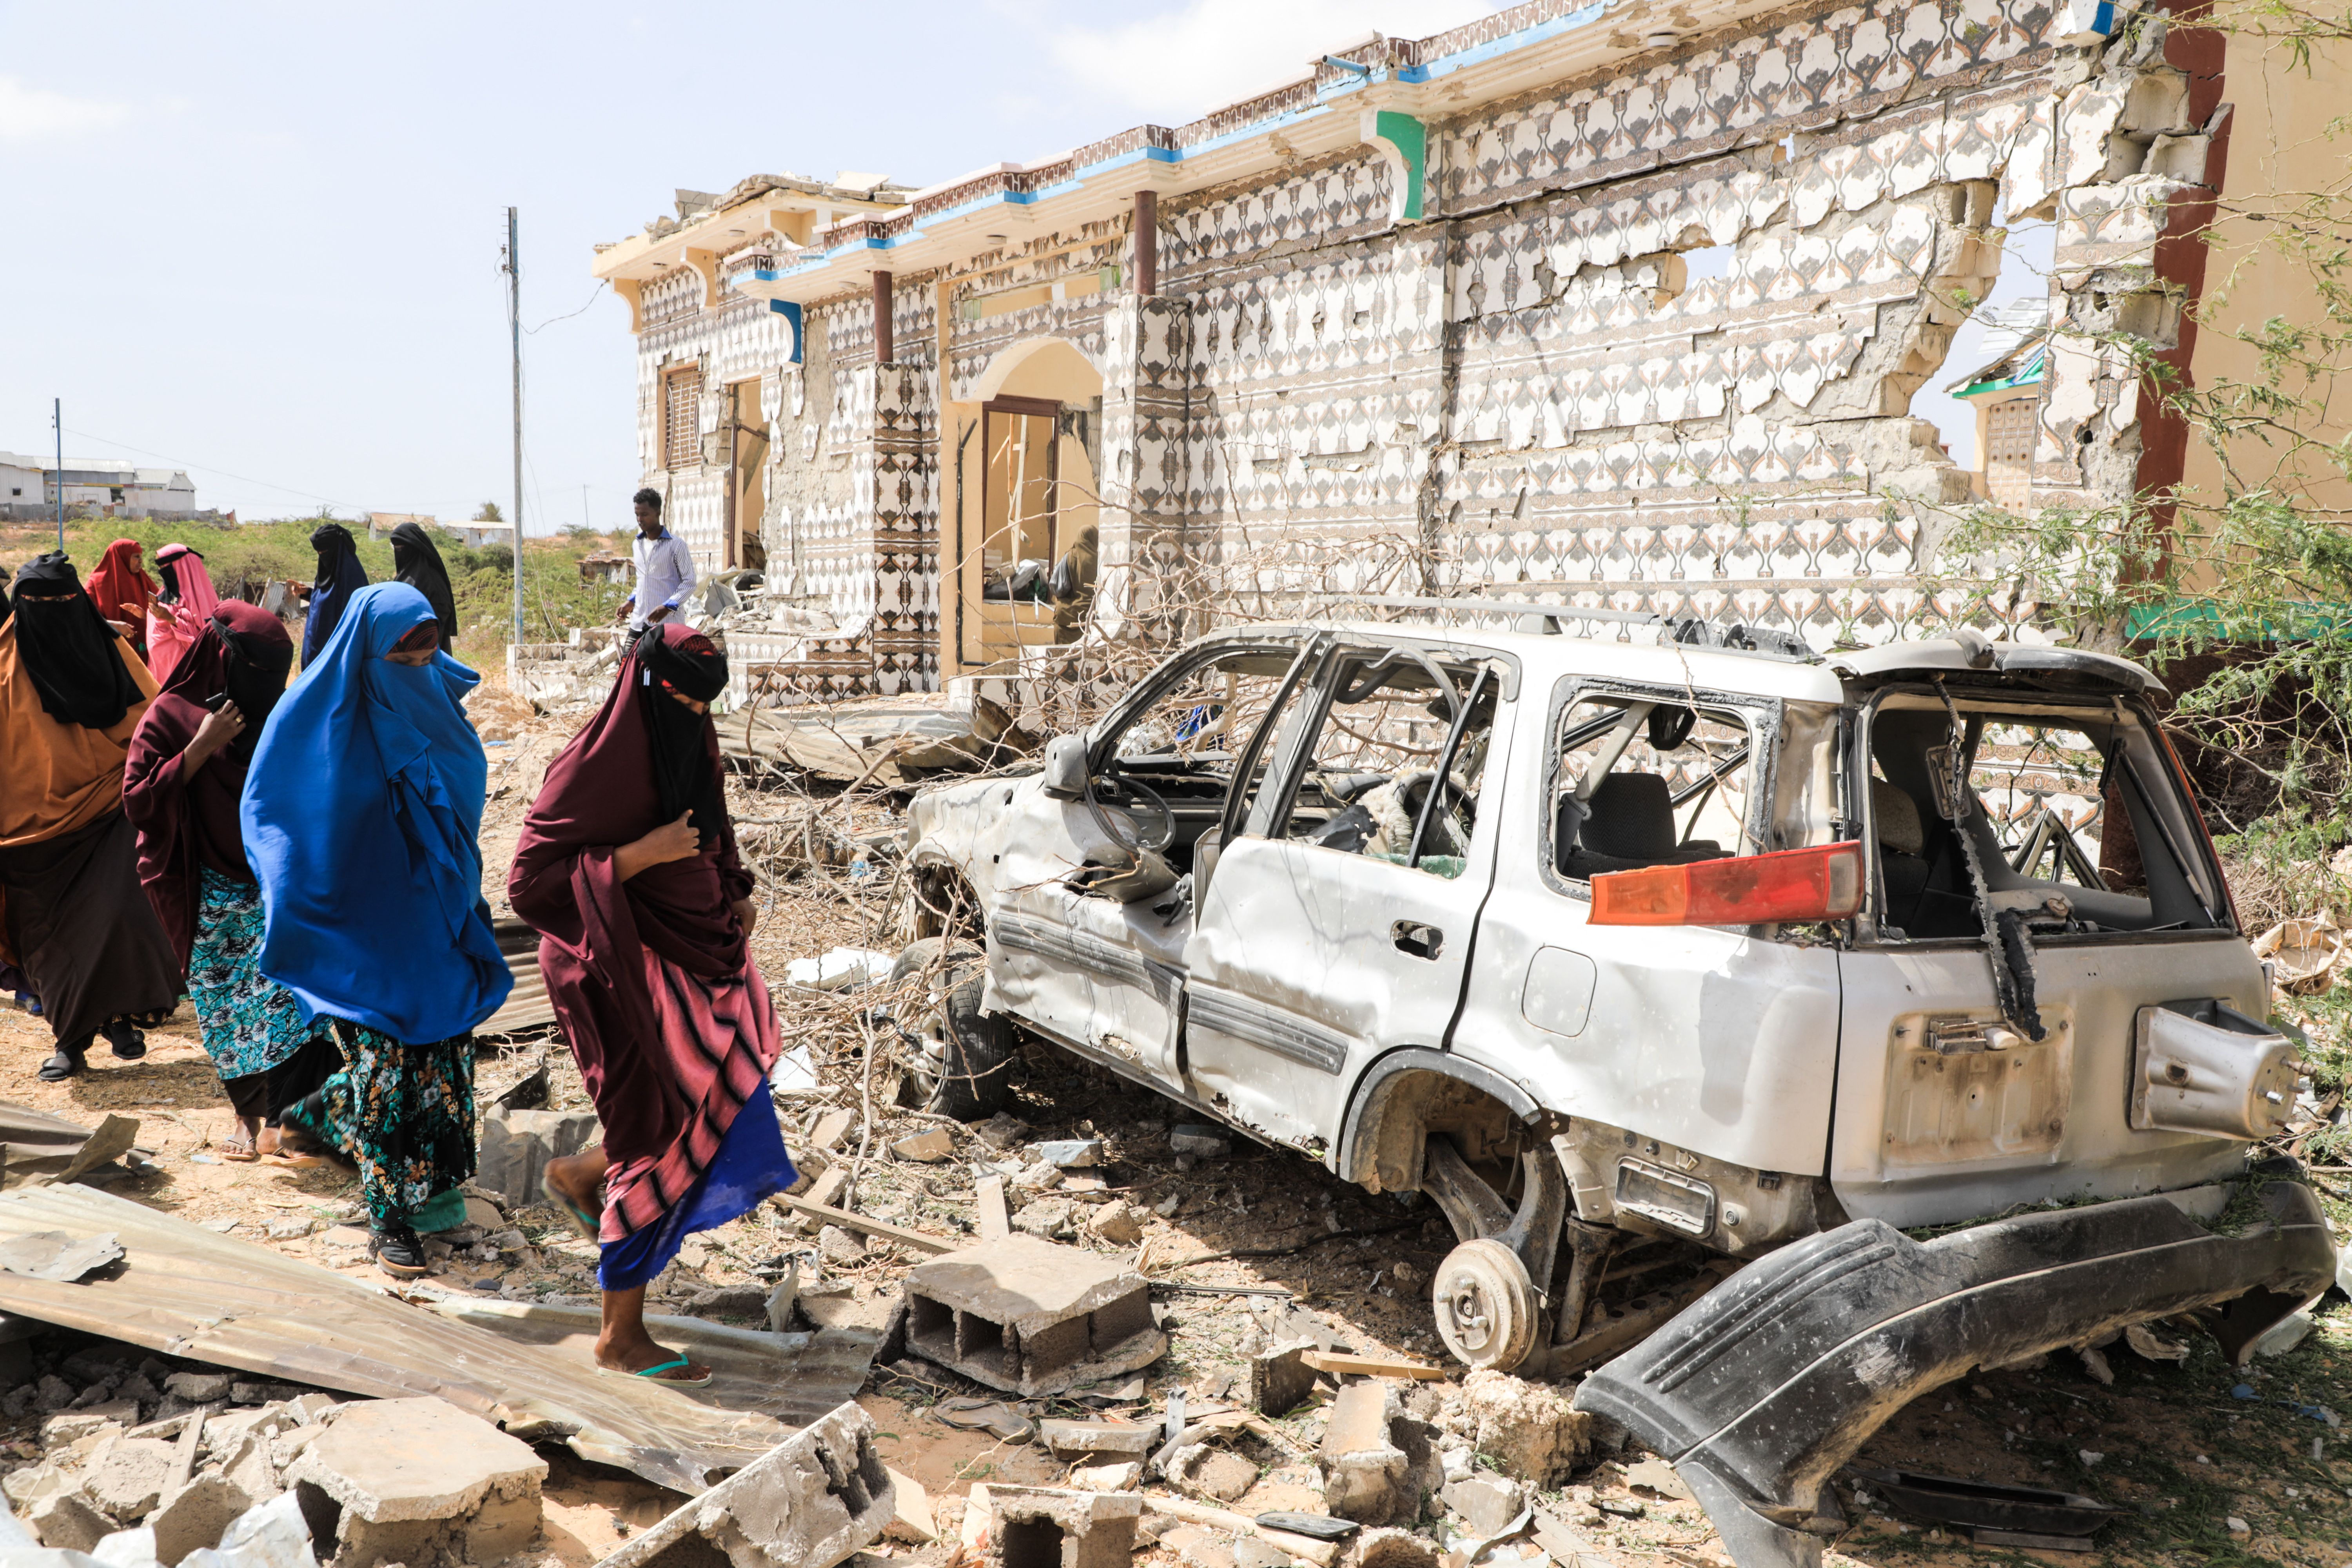 The number of attacks claimed by al-Shabab have increased recently, including an attack on police stations in February 2022